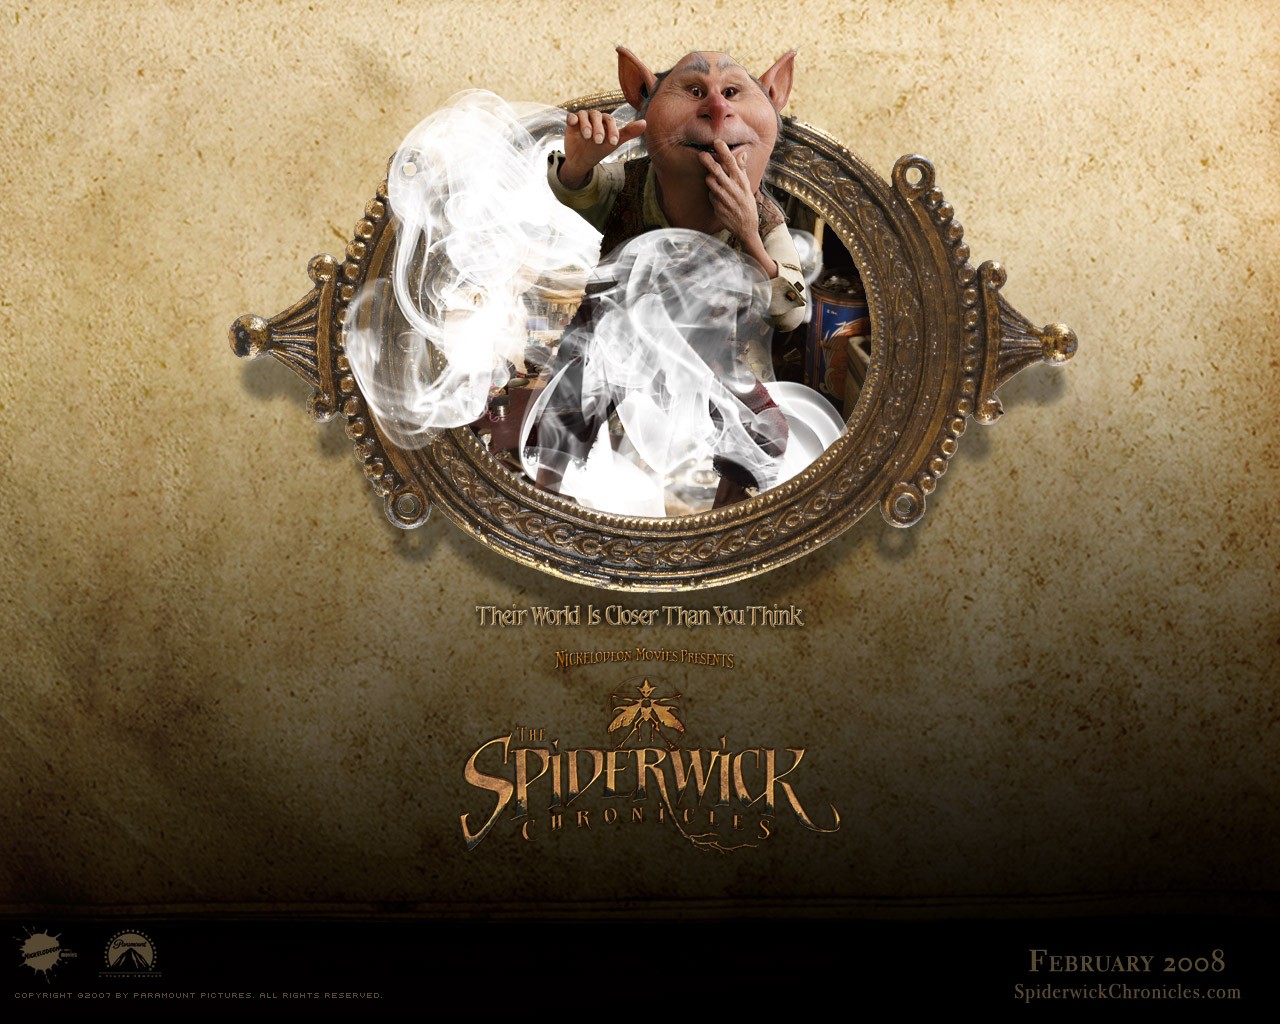 Download HQ The Spiderwick Chronicles wallpaper / Movies / 1280x1024